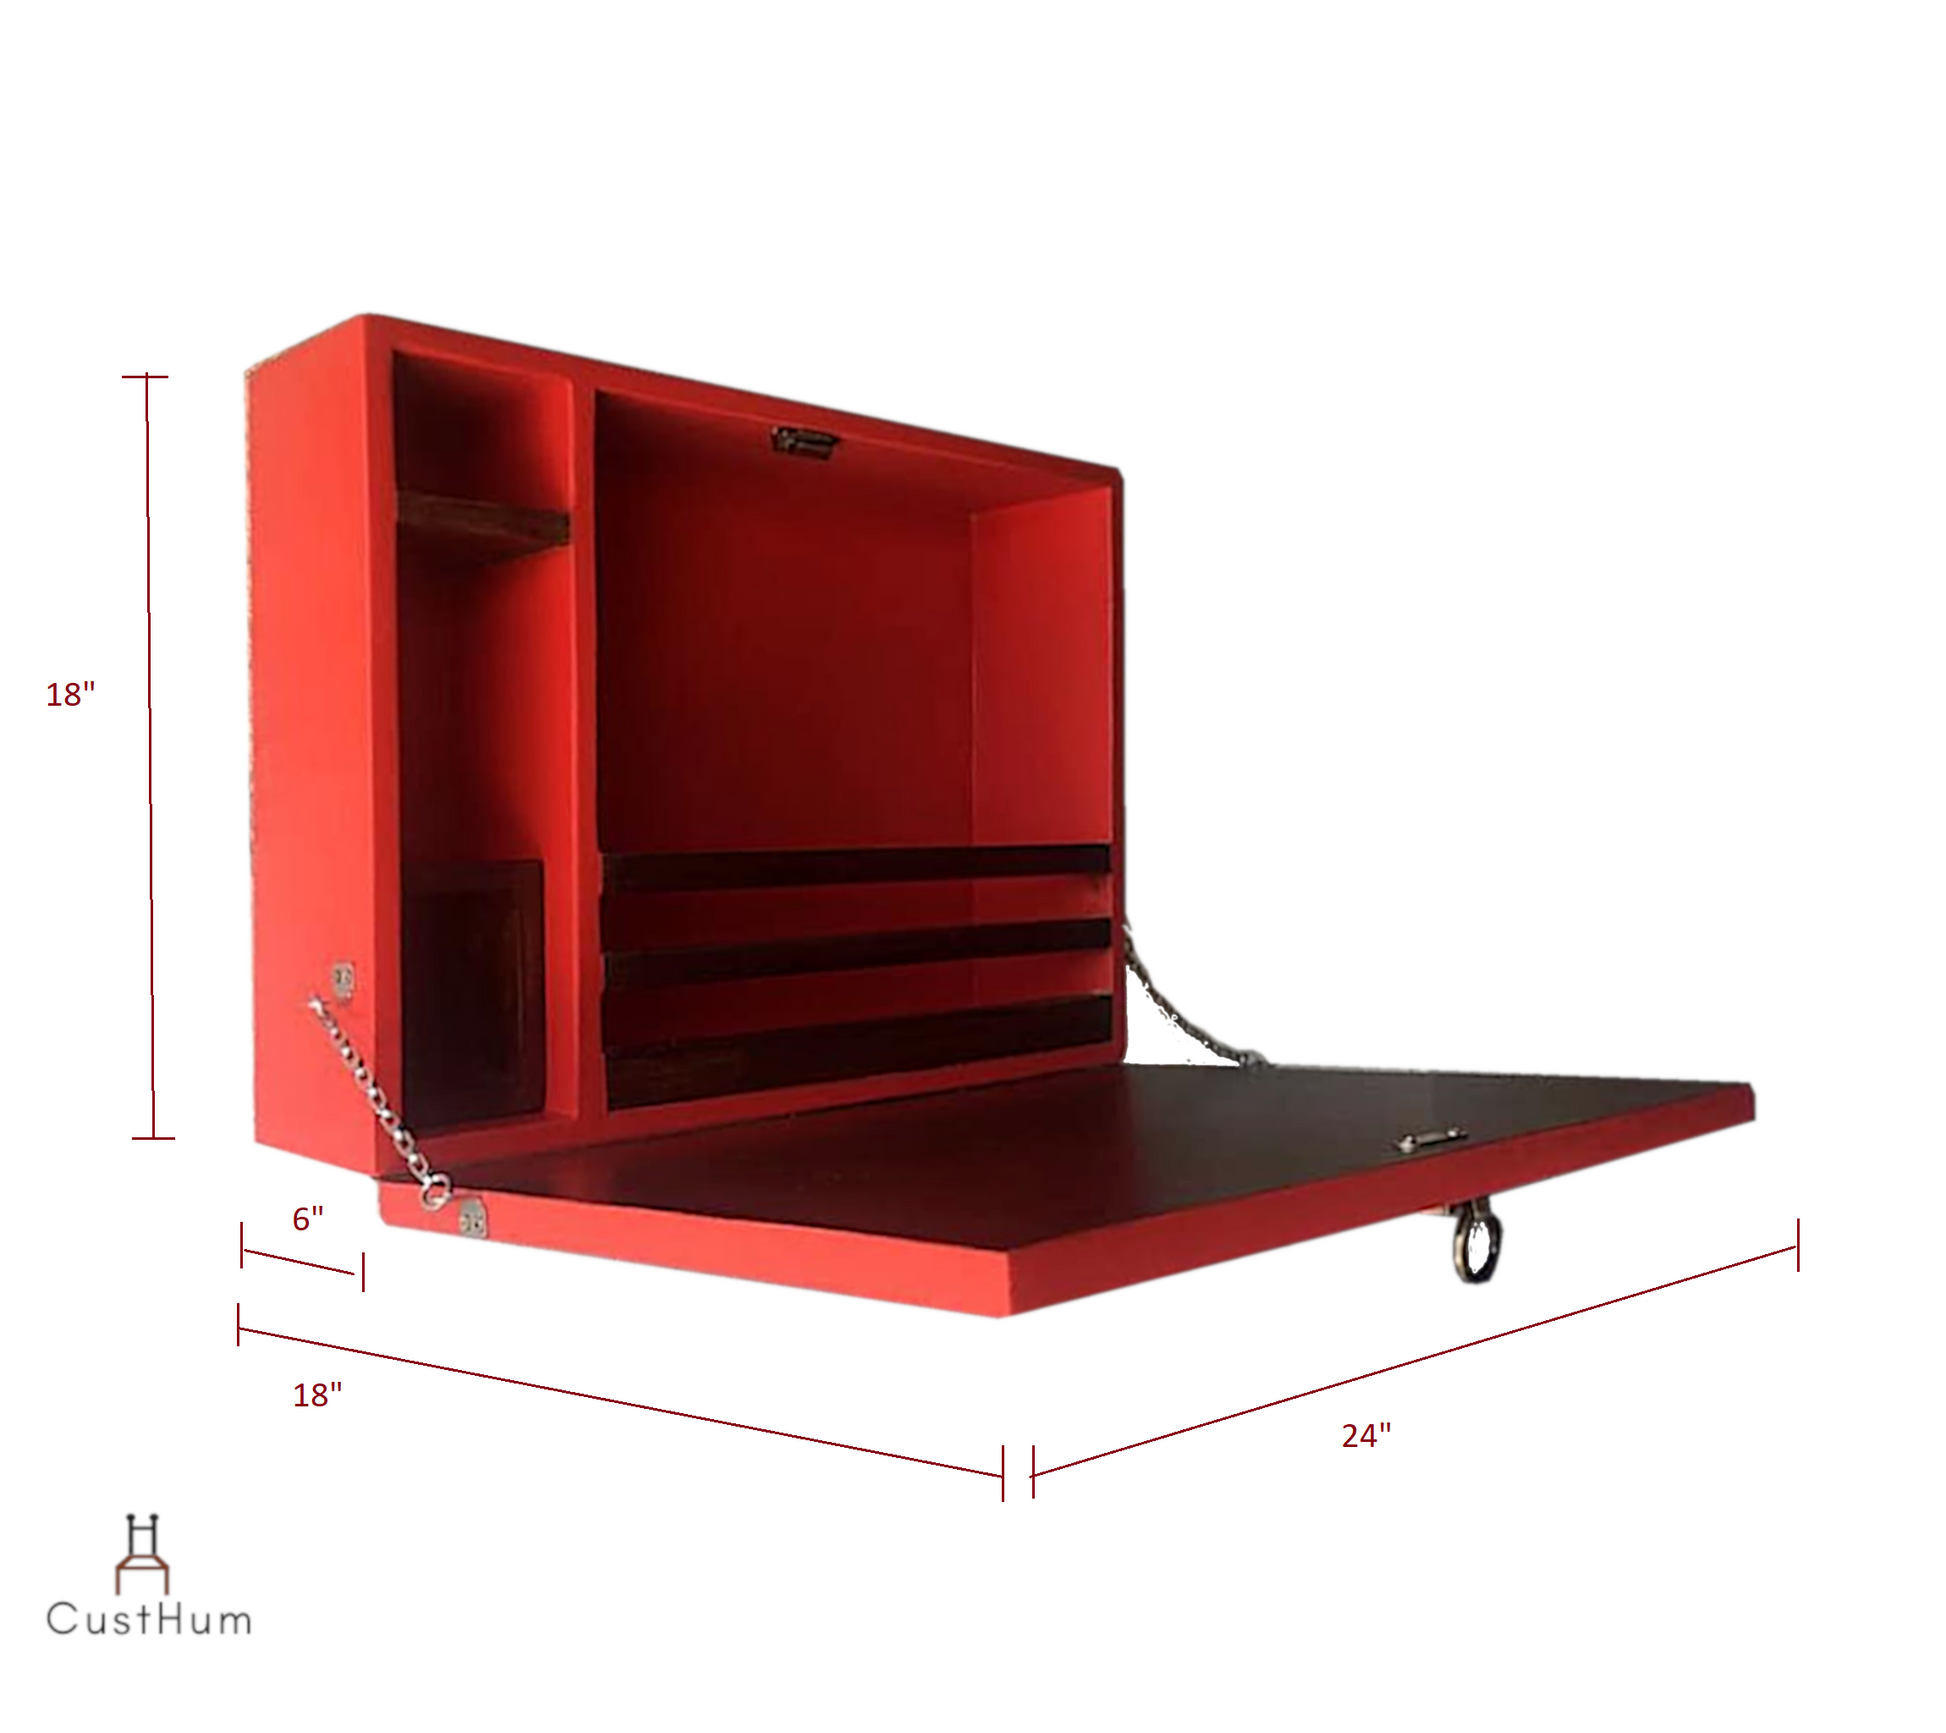 CustHum Pluma-wall mounted folding table-painted red (ISO, open view showing inside compartments)